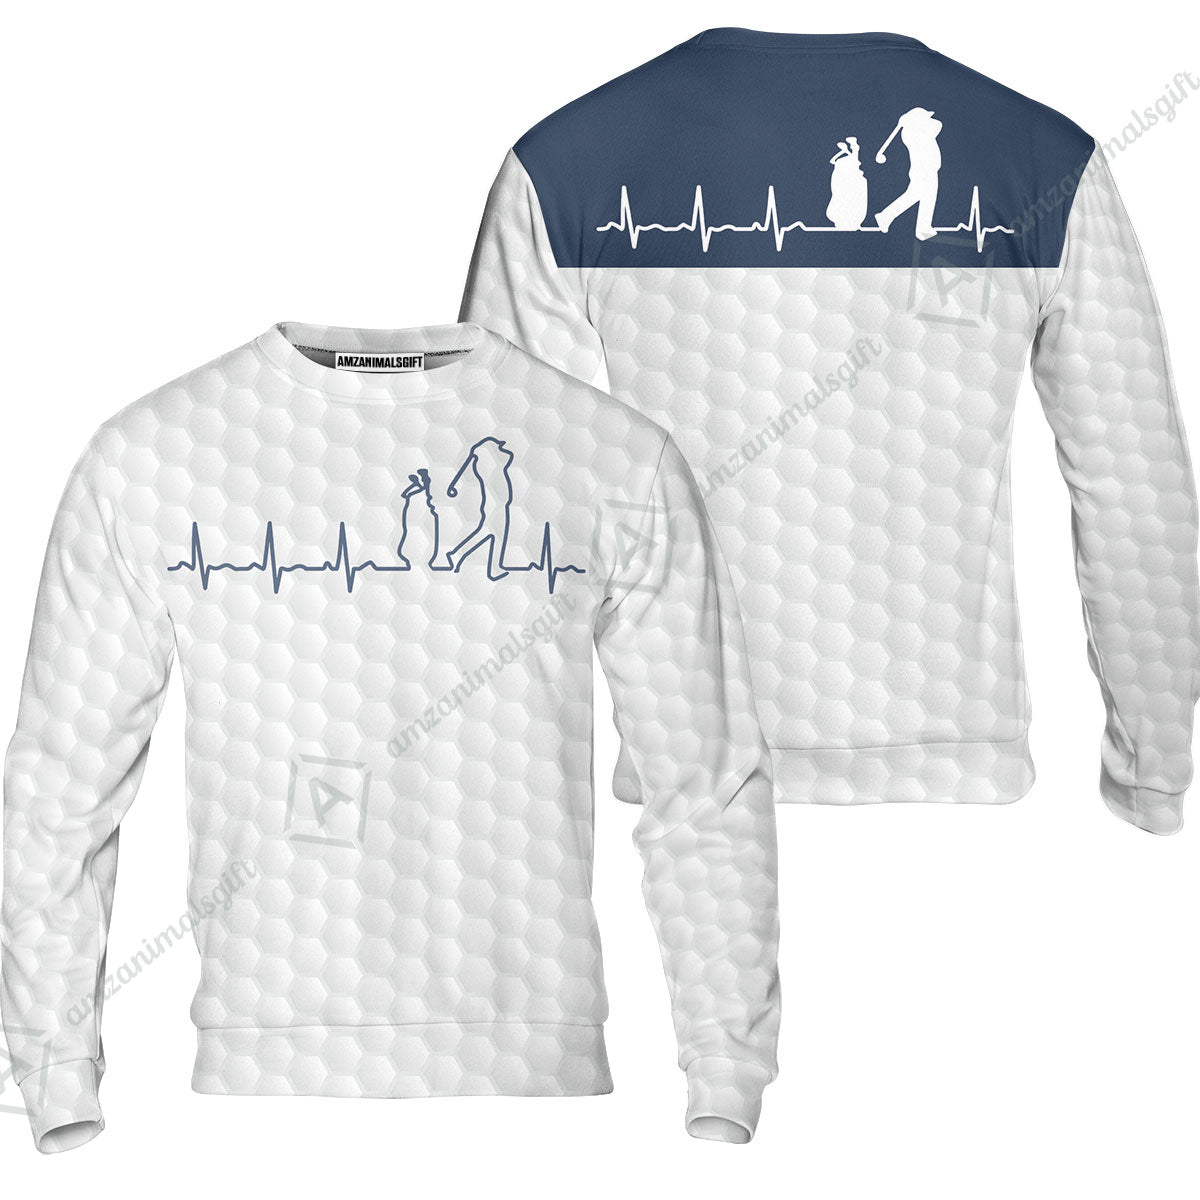 Golf Sweatshirt - Heartbeat Golfer White And Navy Golf Sweatshirt, White Golf Ball Pattern Sweatshirt - Best Gift For Golfers